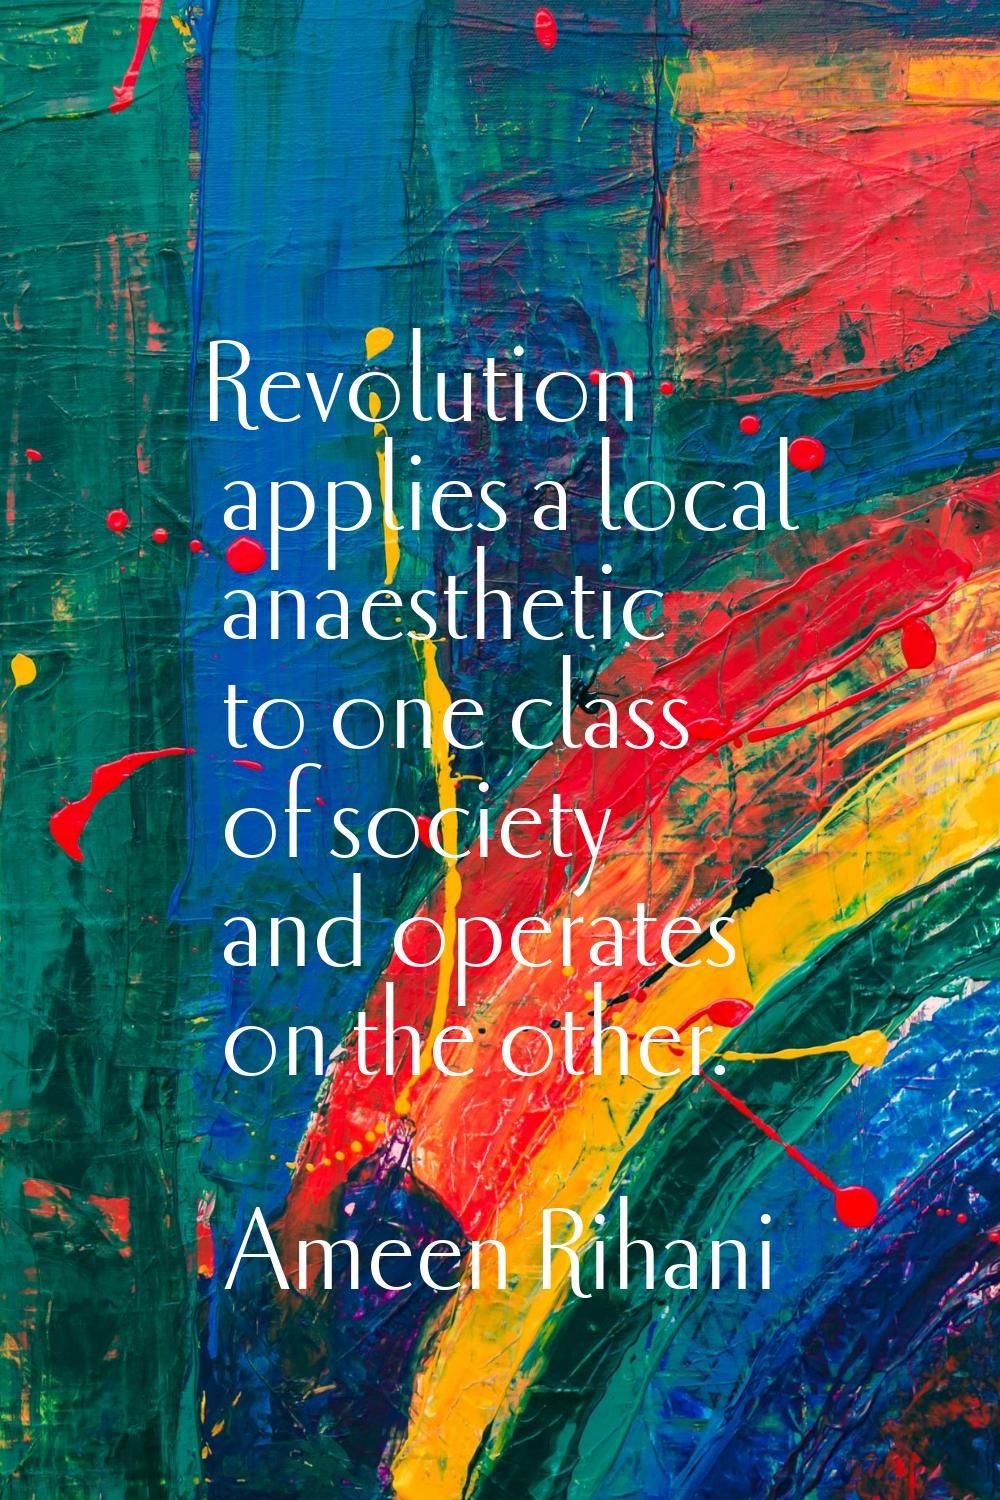 Revolution applies a local anaesthetic to one class of society and operates on the other.